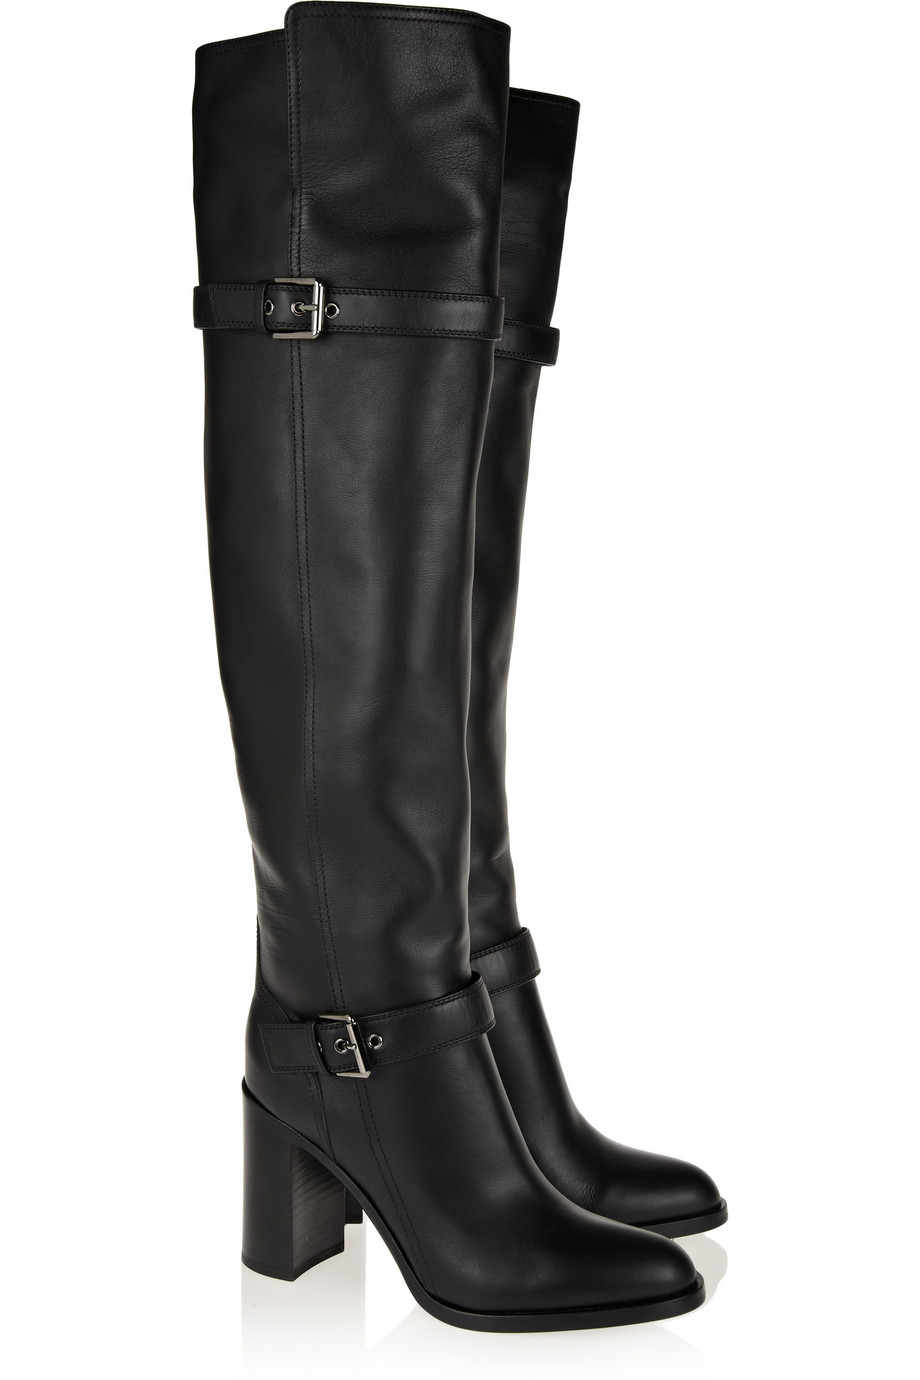 Gianvito Rossi Leather Over-The-Knee Boots in Black | Lyst